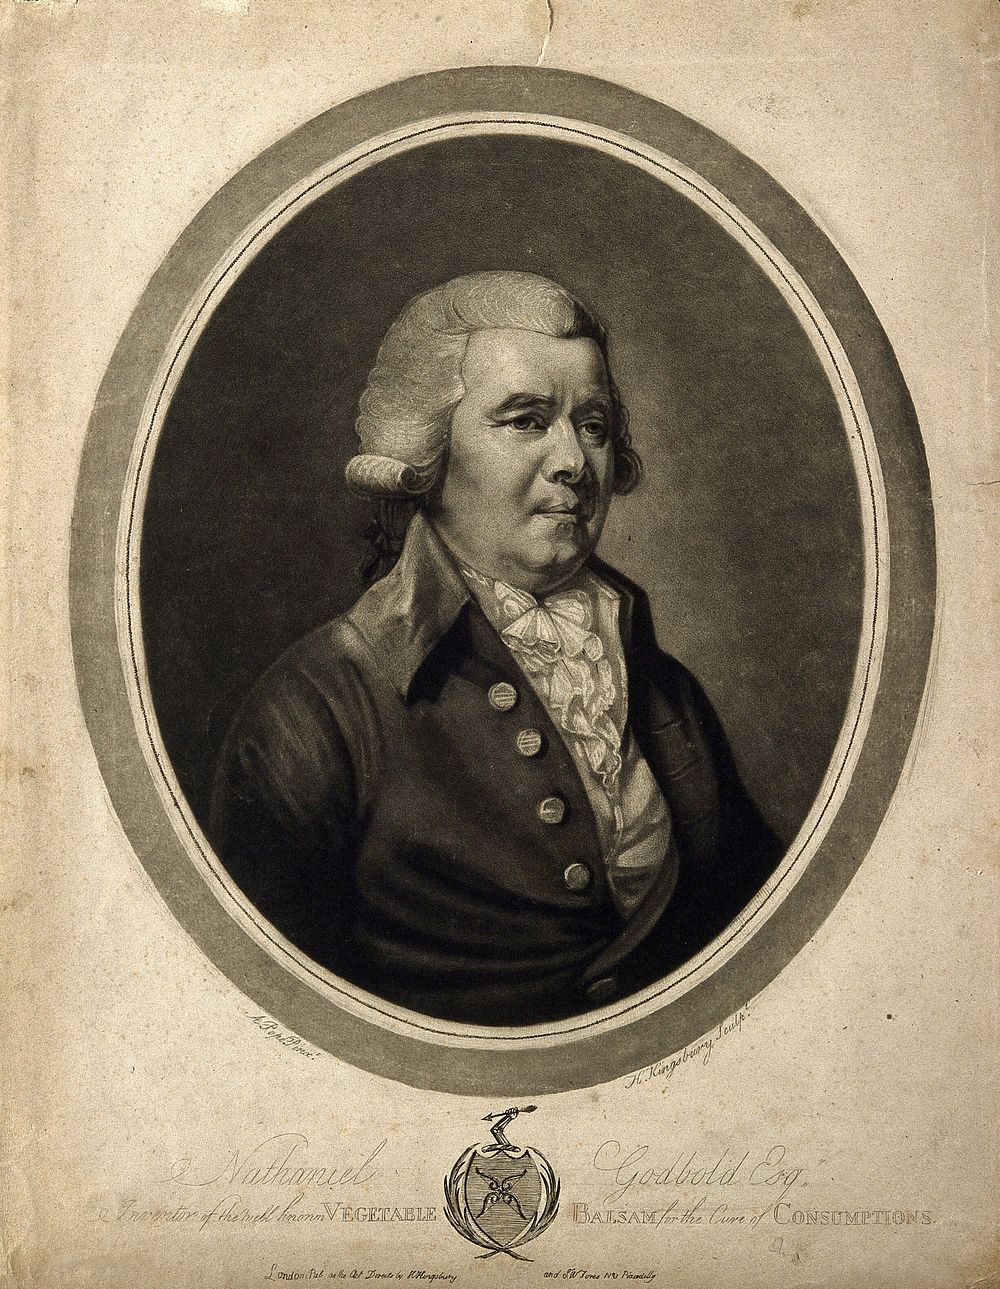 Nathaniel Godbold. Mezzotint by H. Kingsbury after A. Pope.